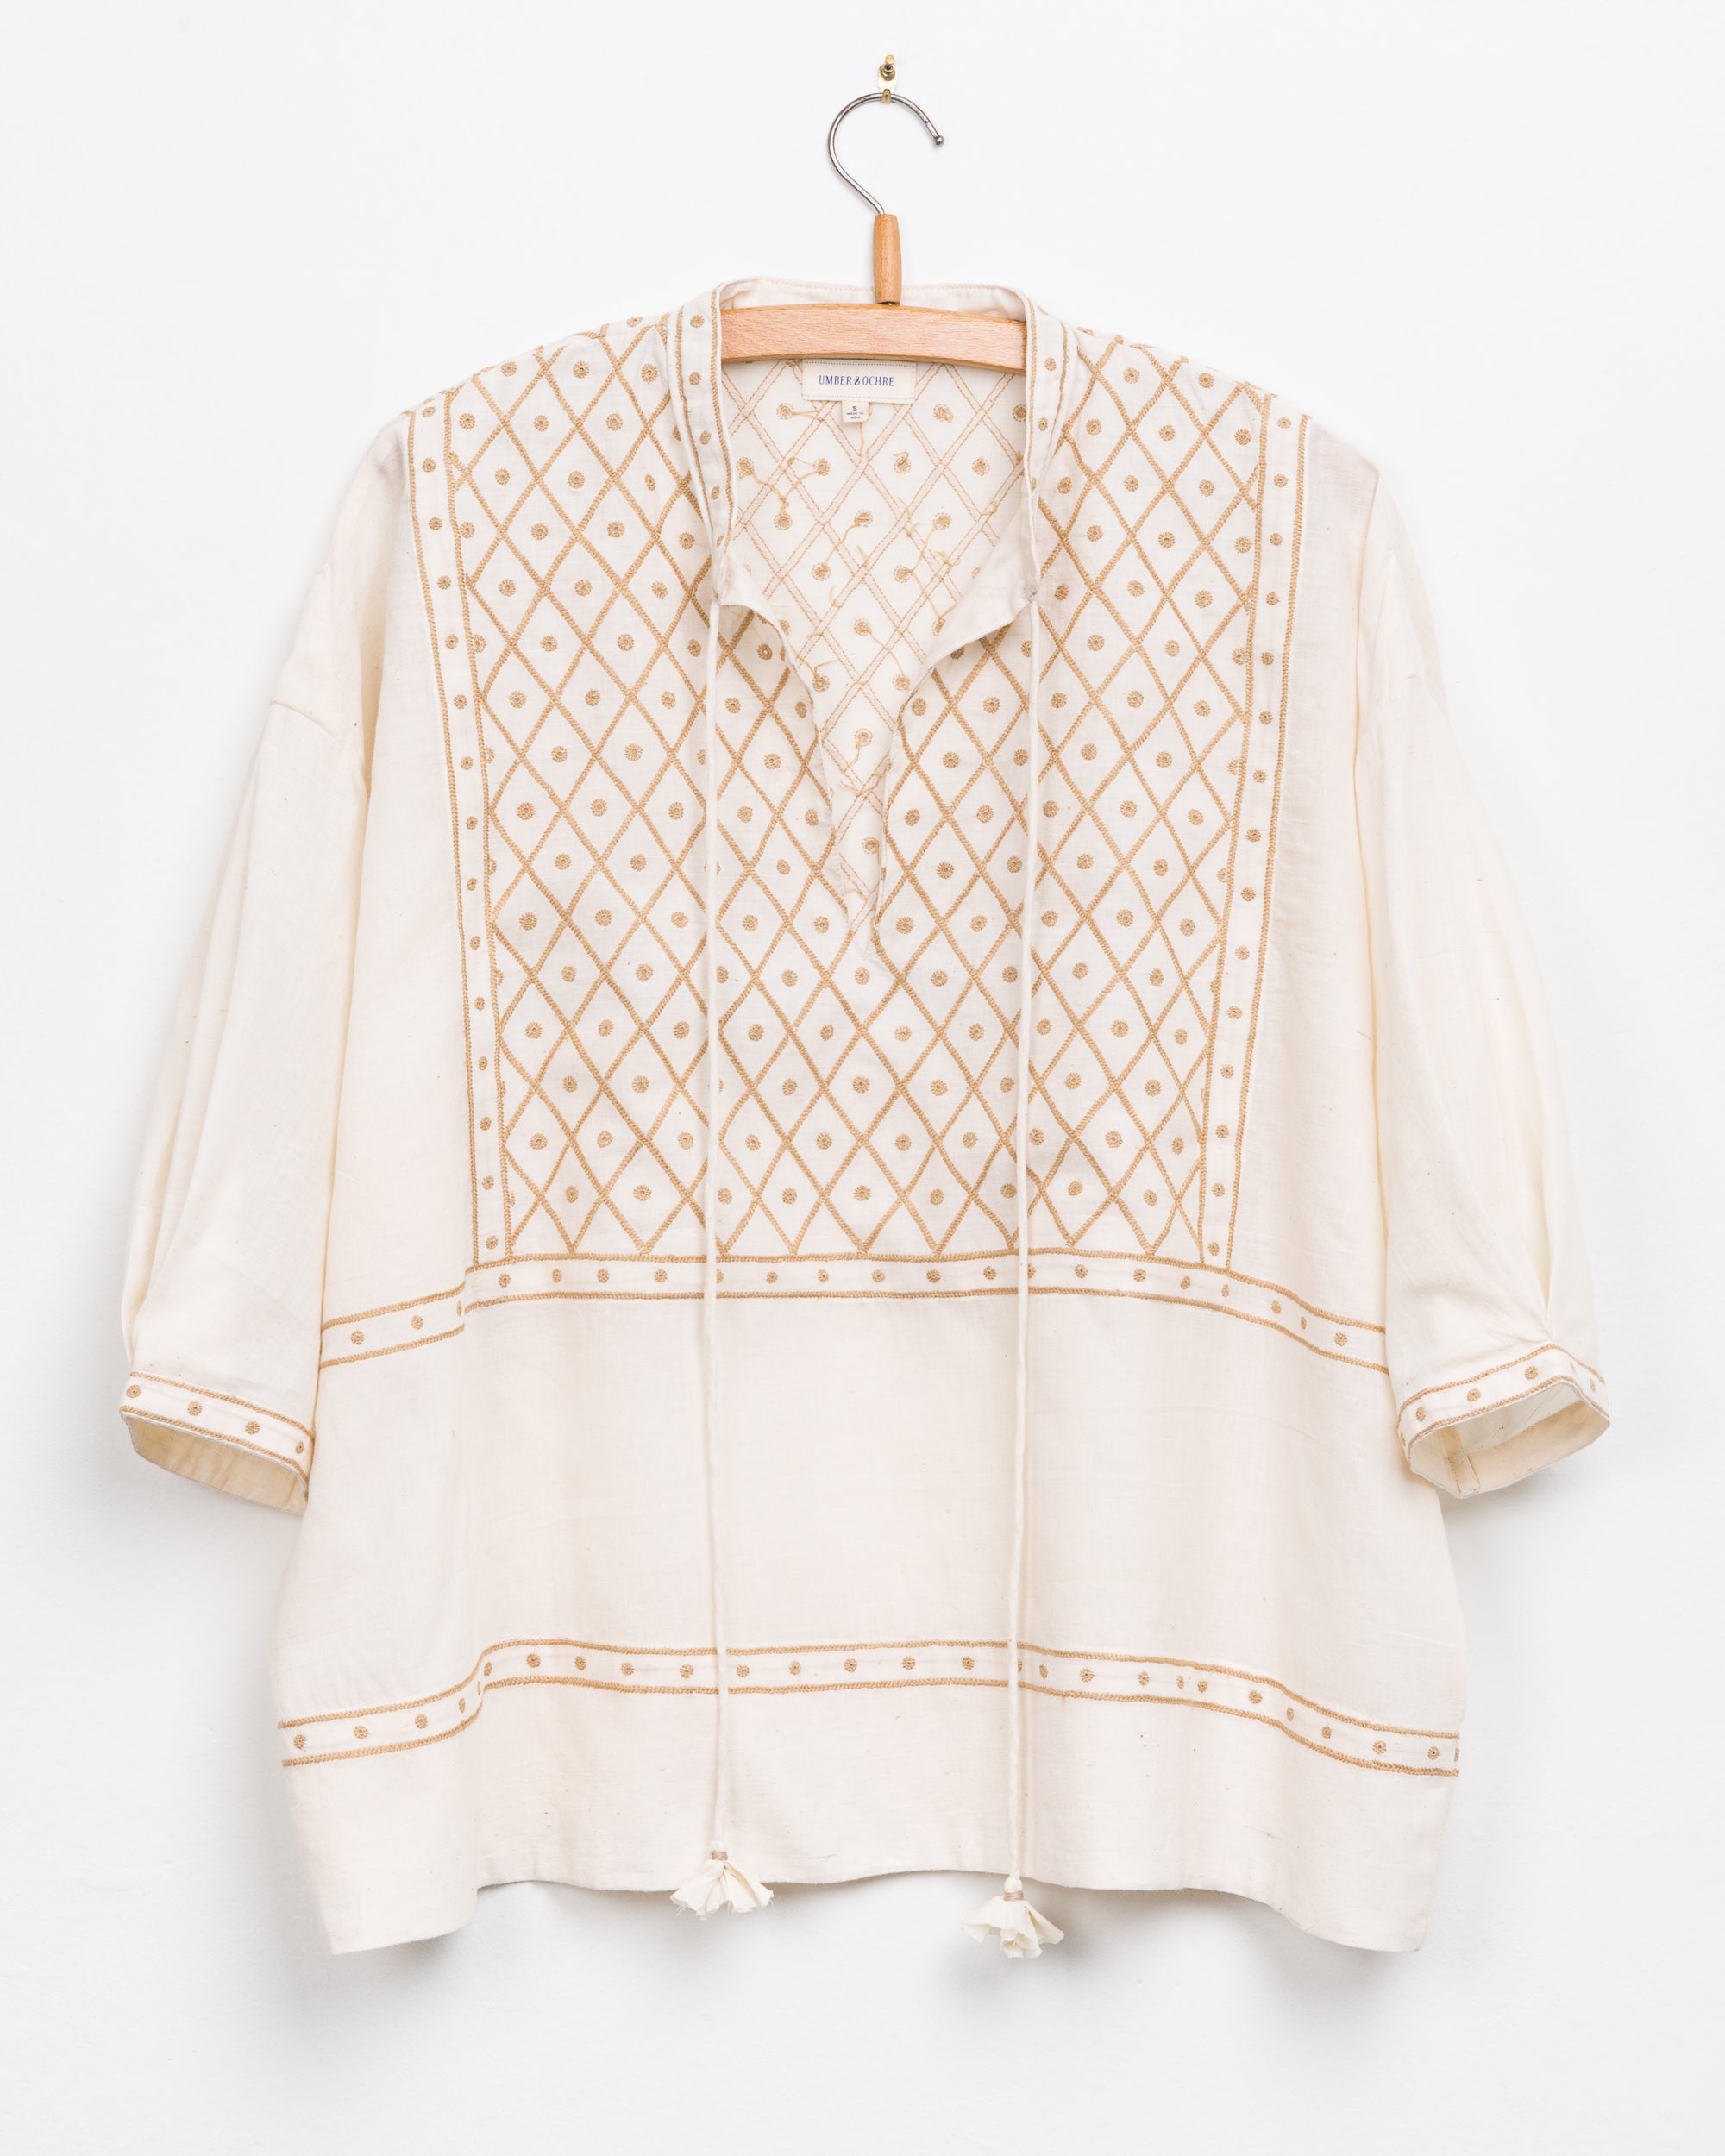 Hema Top in Embroidery MW